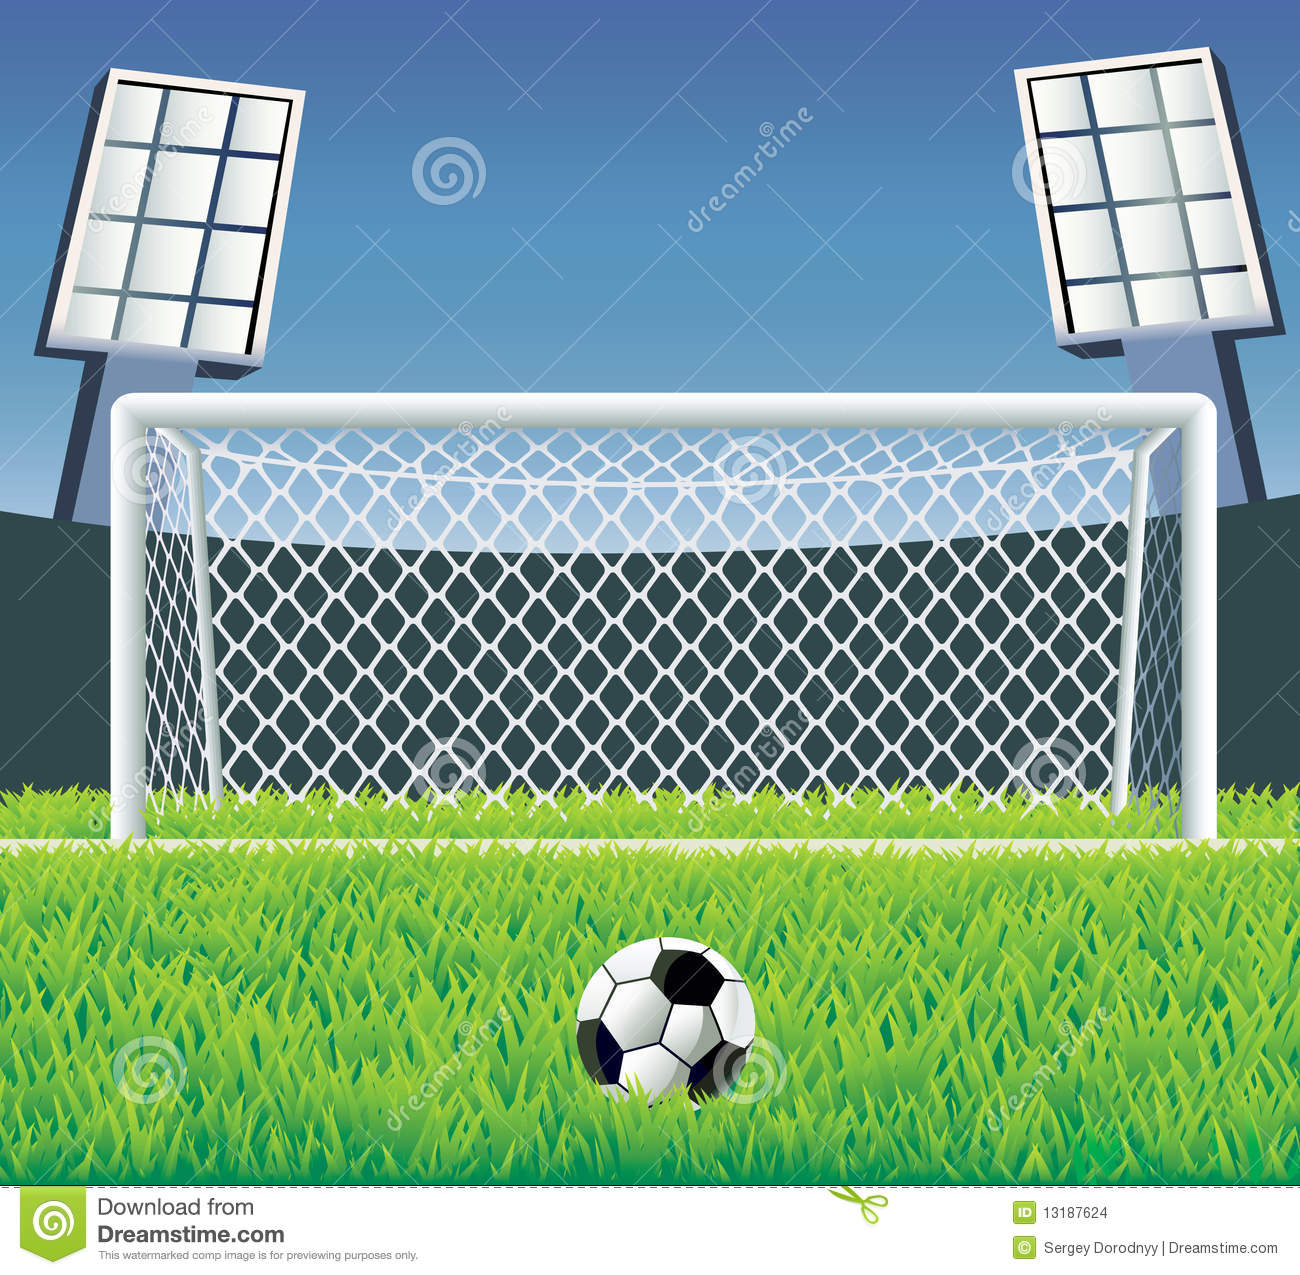 Soccer Goal With Realistic Grass  Stock Images   Image  13187624